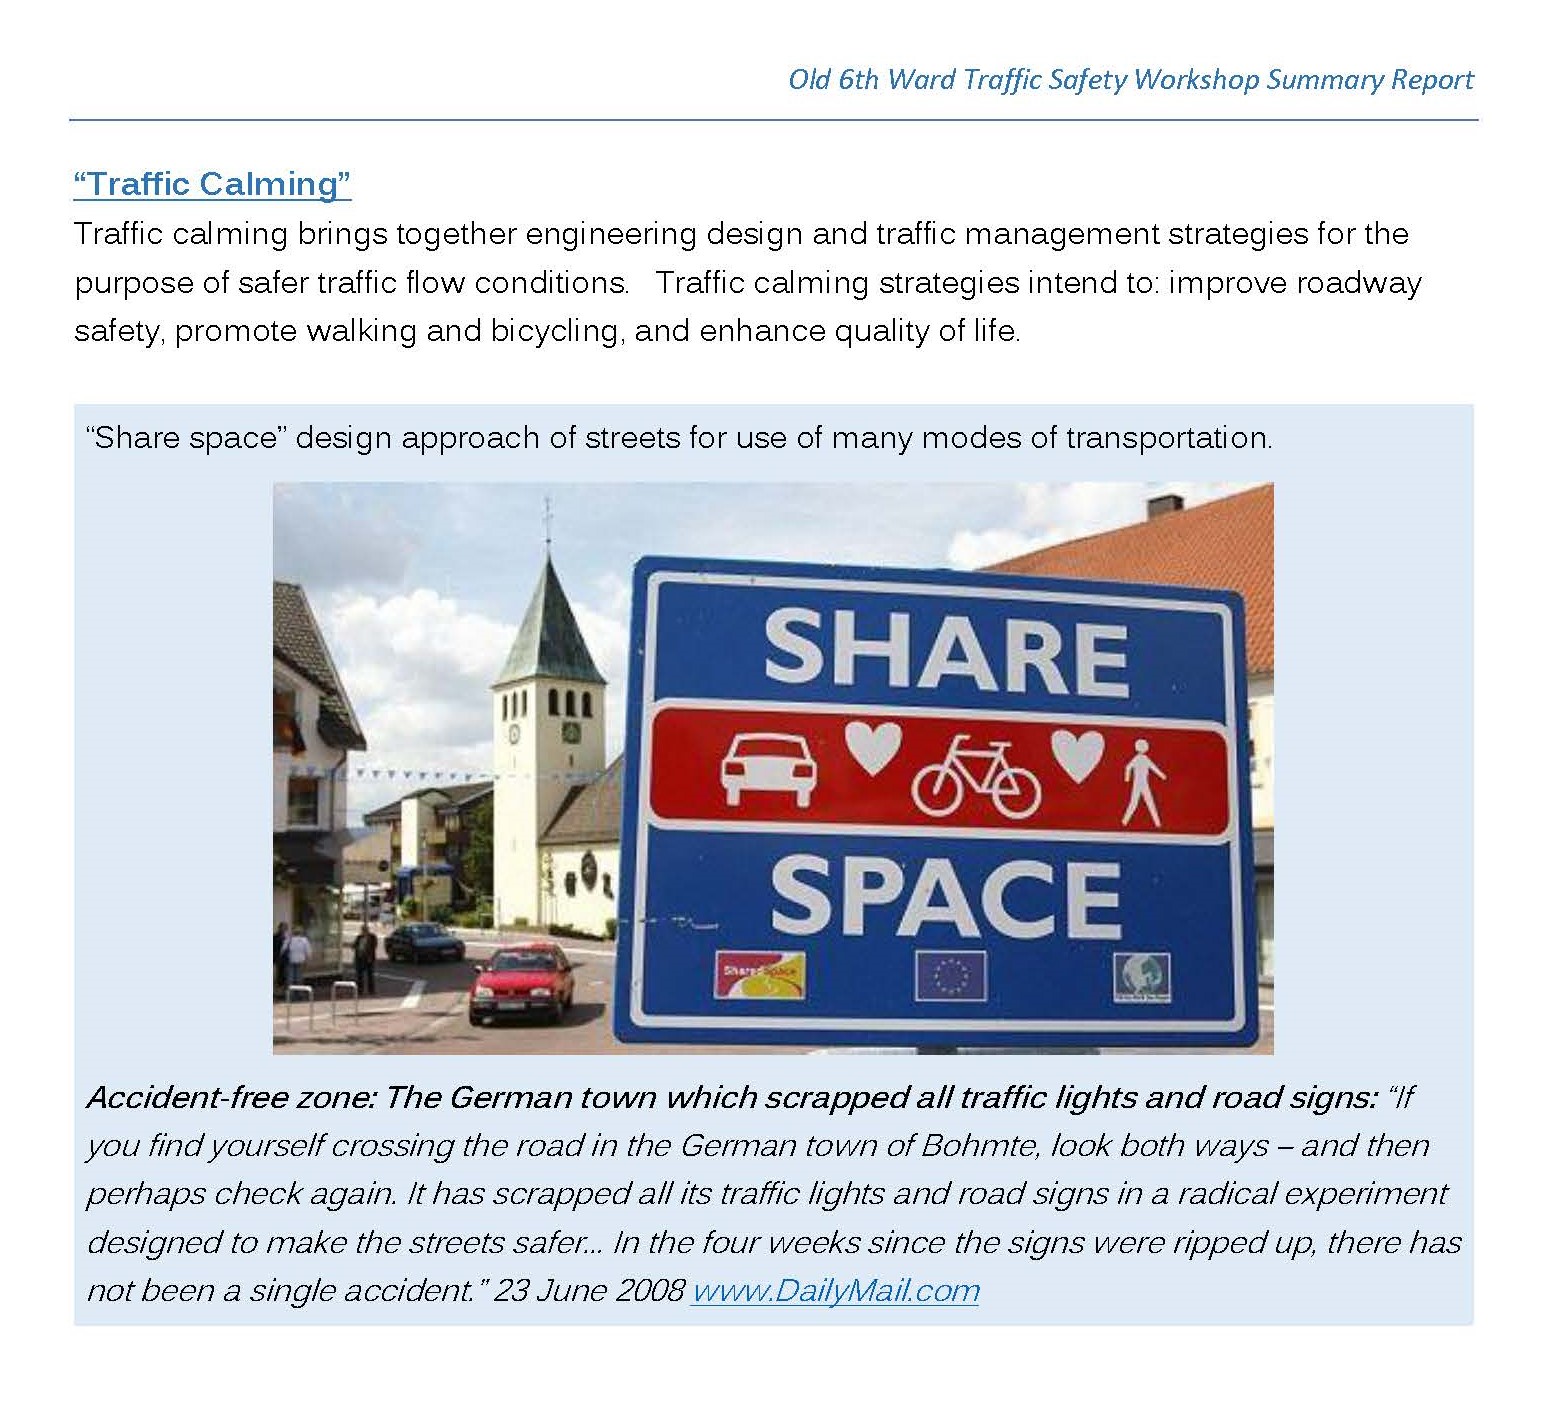 OSW Traffic Safety Workshop Summary Report FINAL April 2019_Page_05